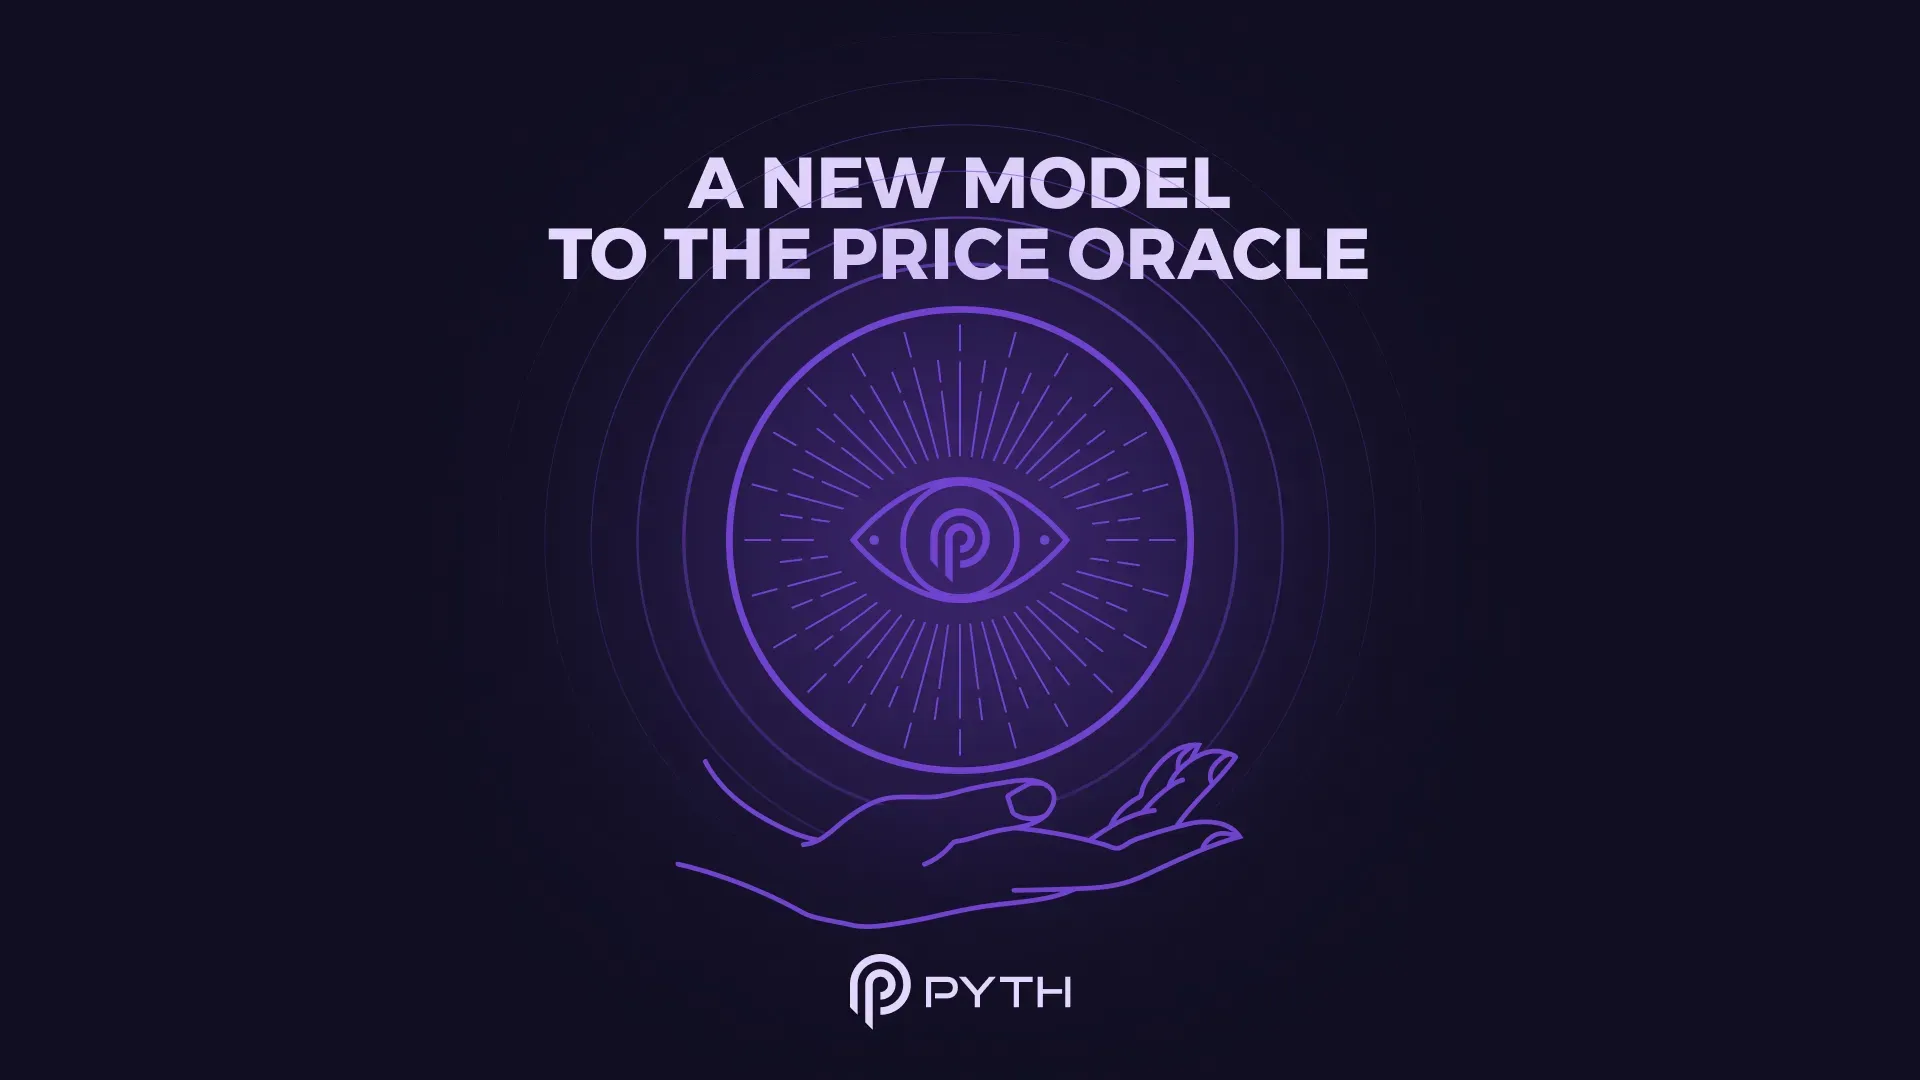 Pull, Don't Push: Pyth Pull Oracle Architecture